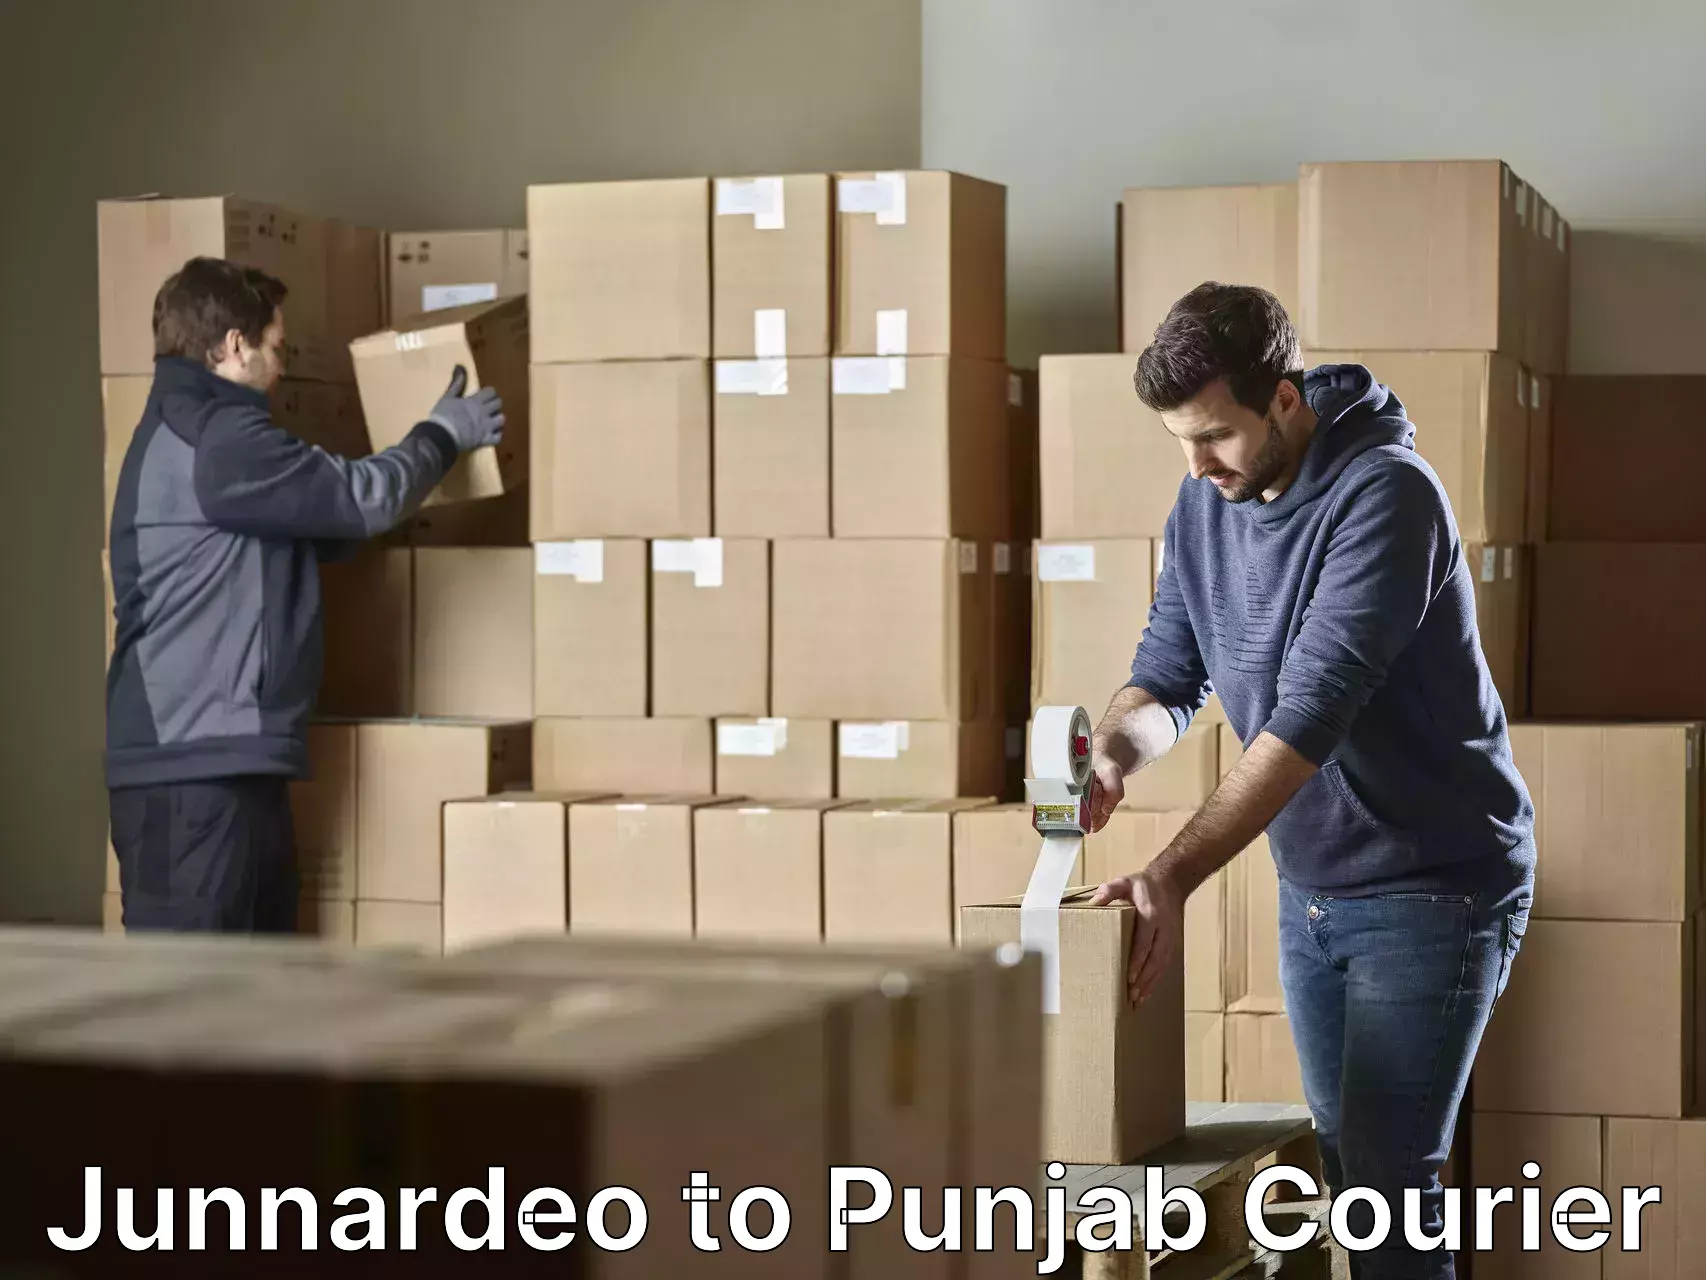 Professional home movers Junnardeo to Amritsar